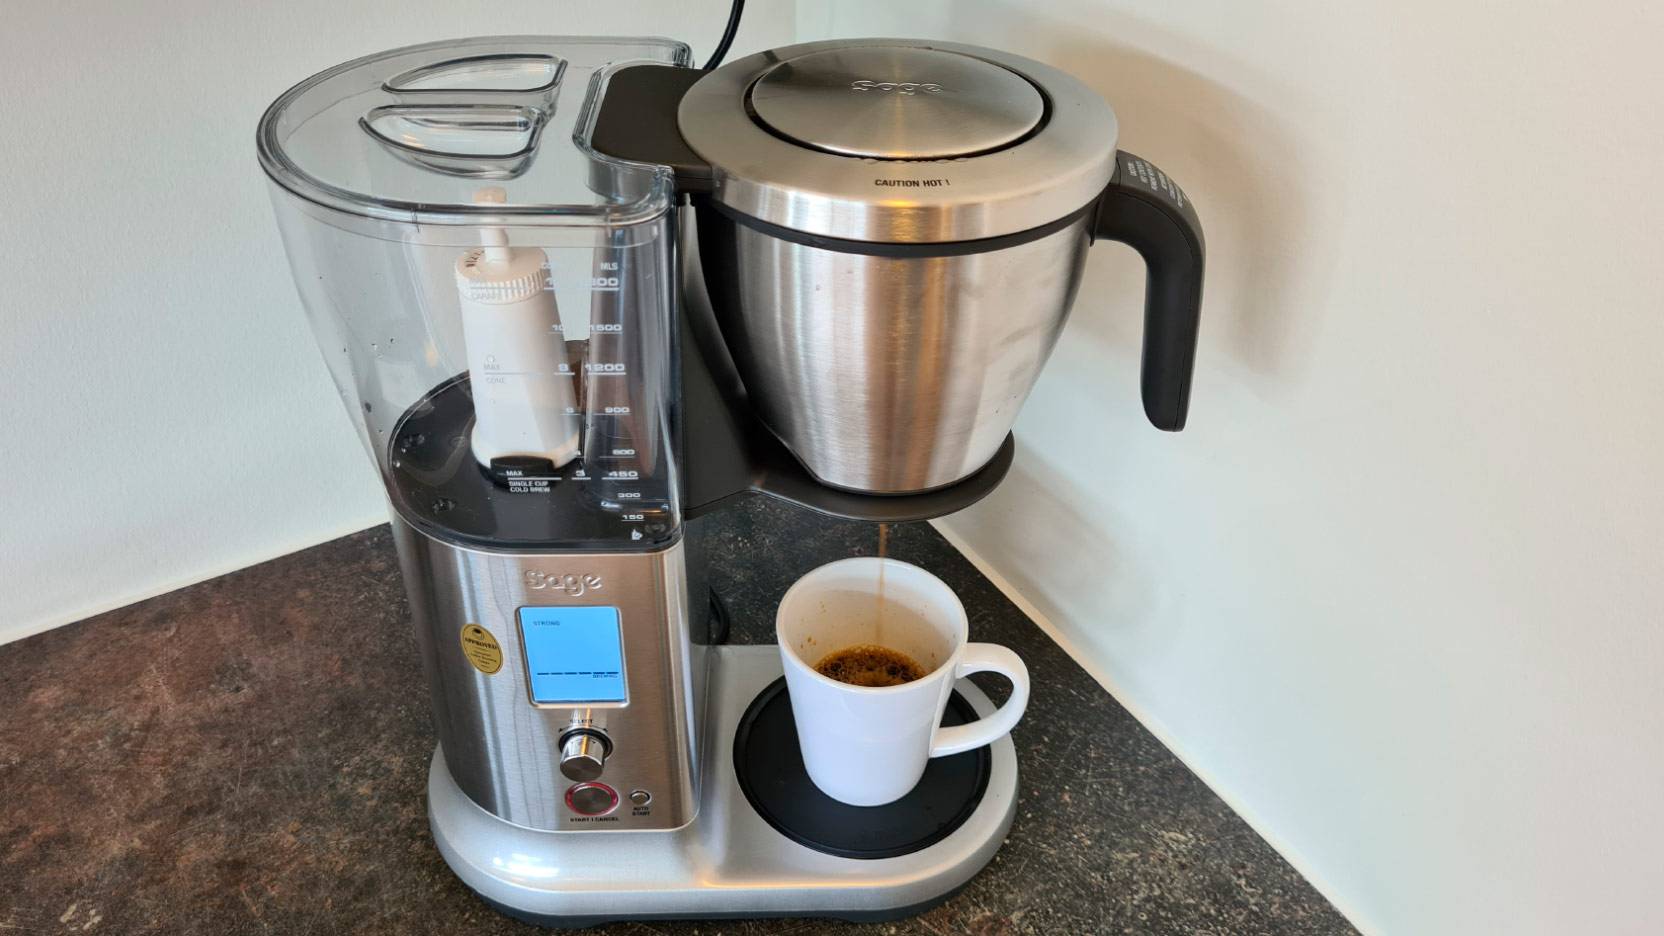 Test of Sage the Precision Brewer - brewing a single cup of coffee